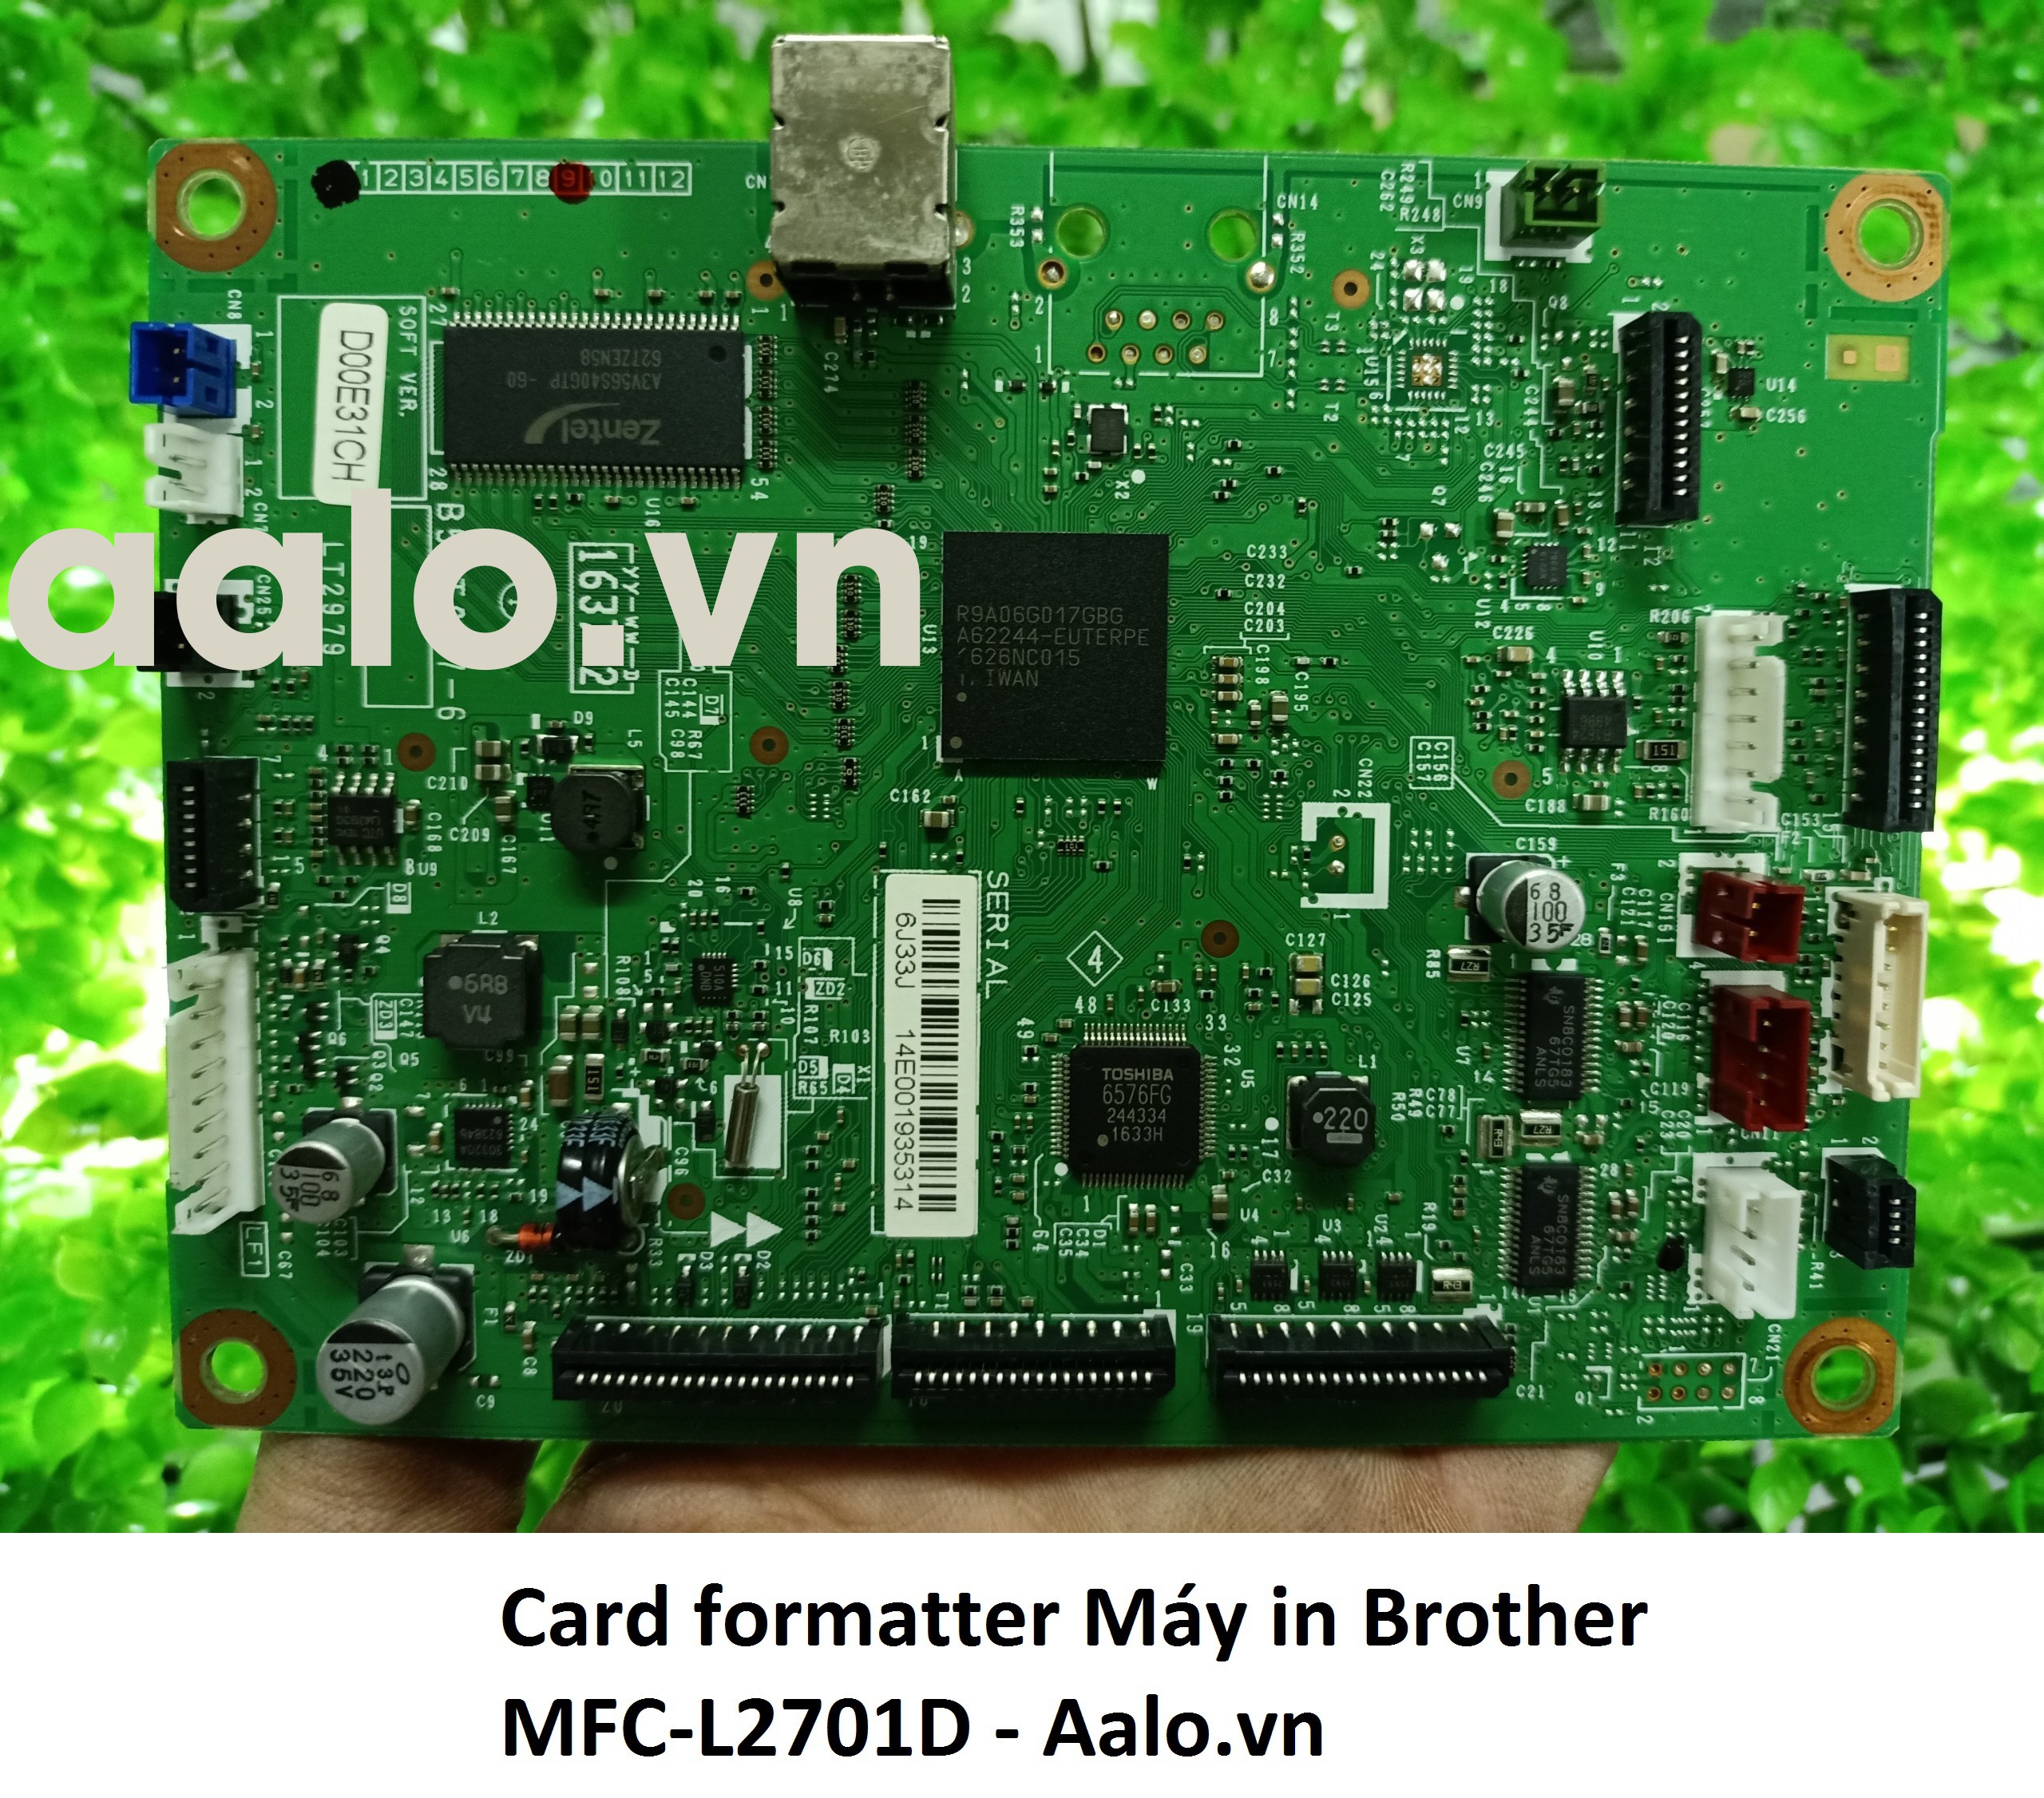 Card formatter Máy in Brother MFC-L2701D